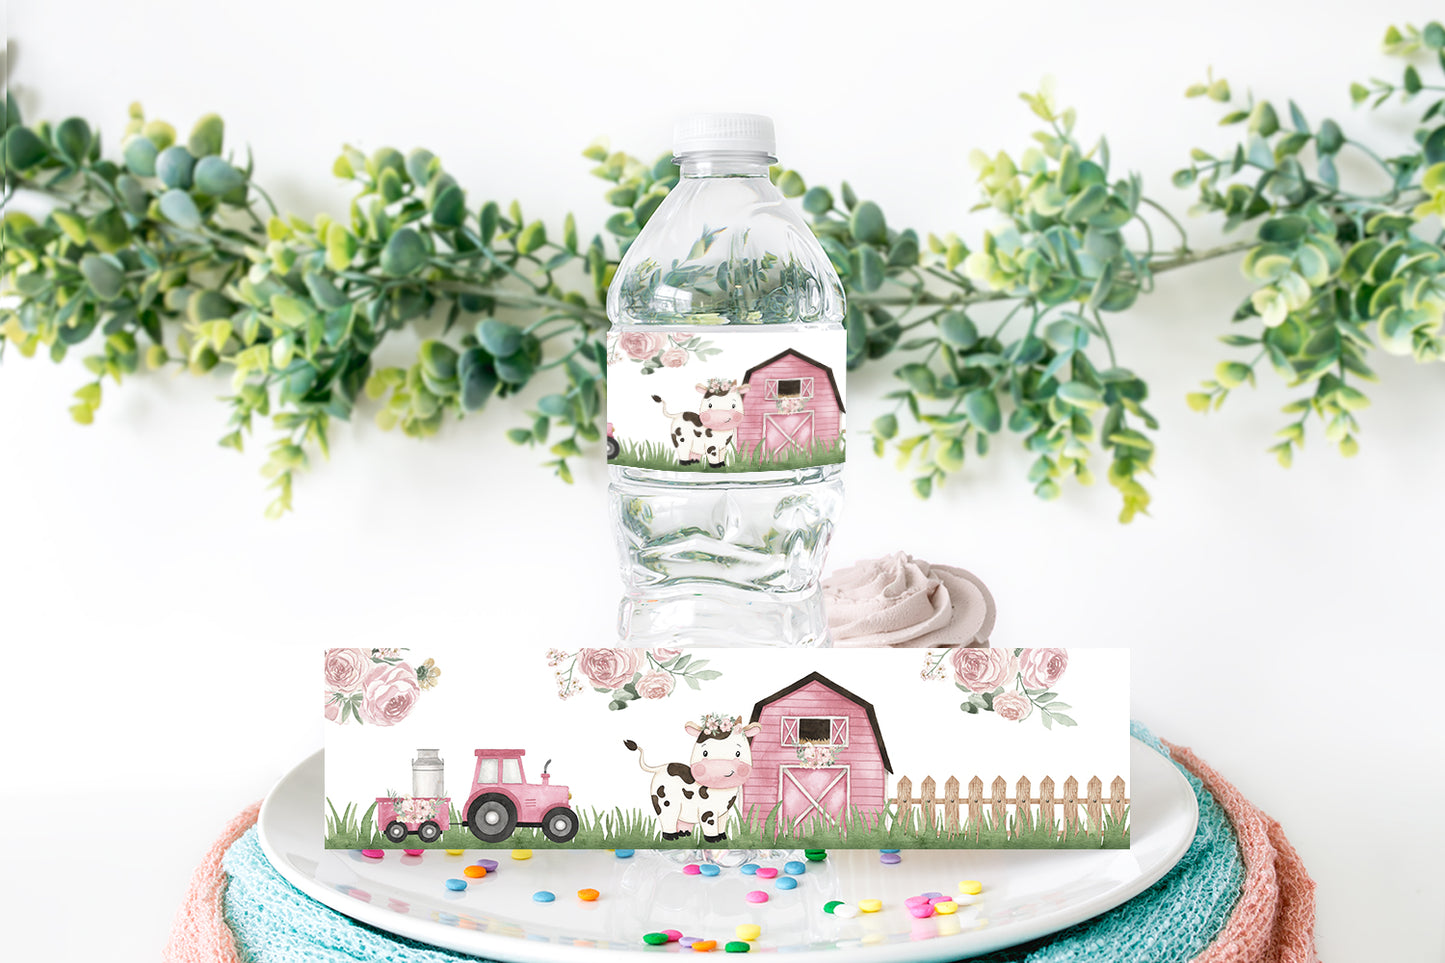 Floral Cow Water Bottle Labels | Girl Farm Themed Party Decorations - 11A